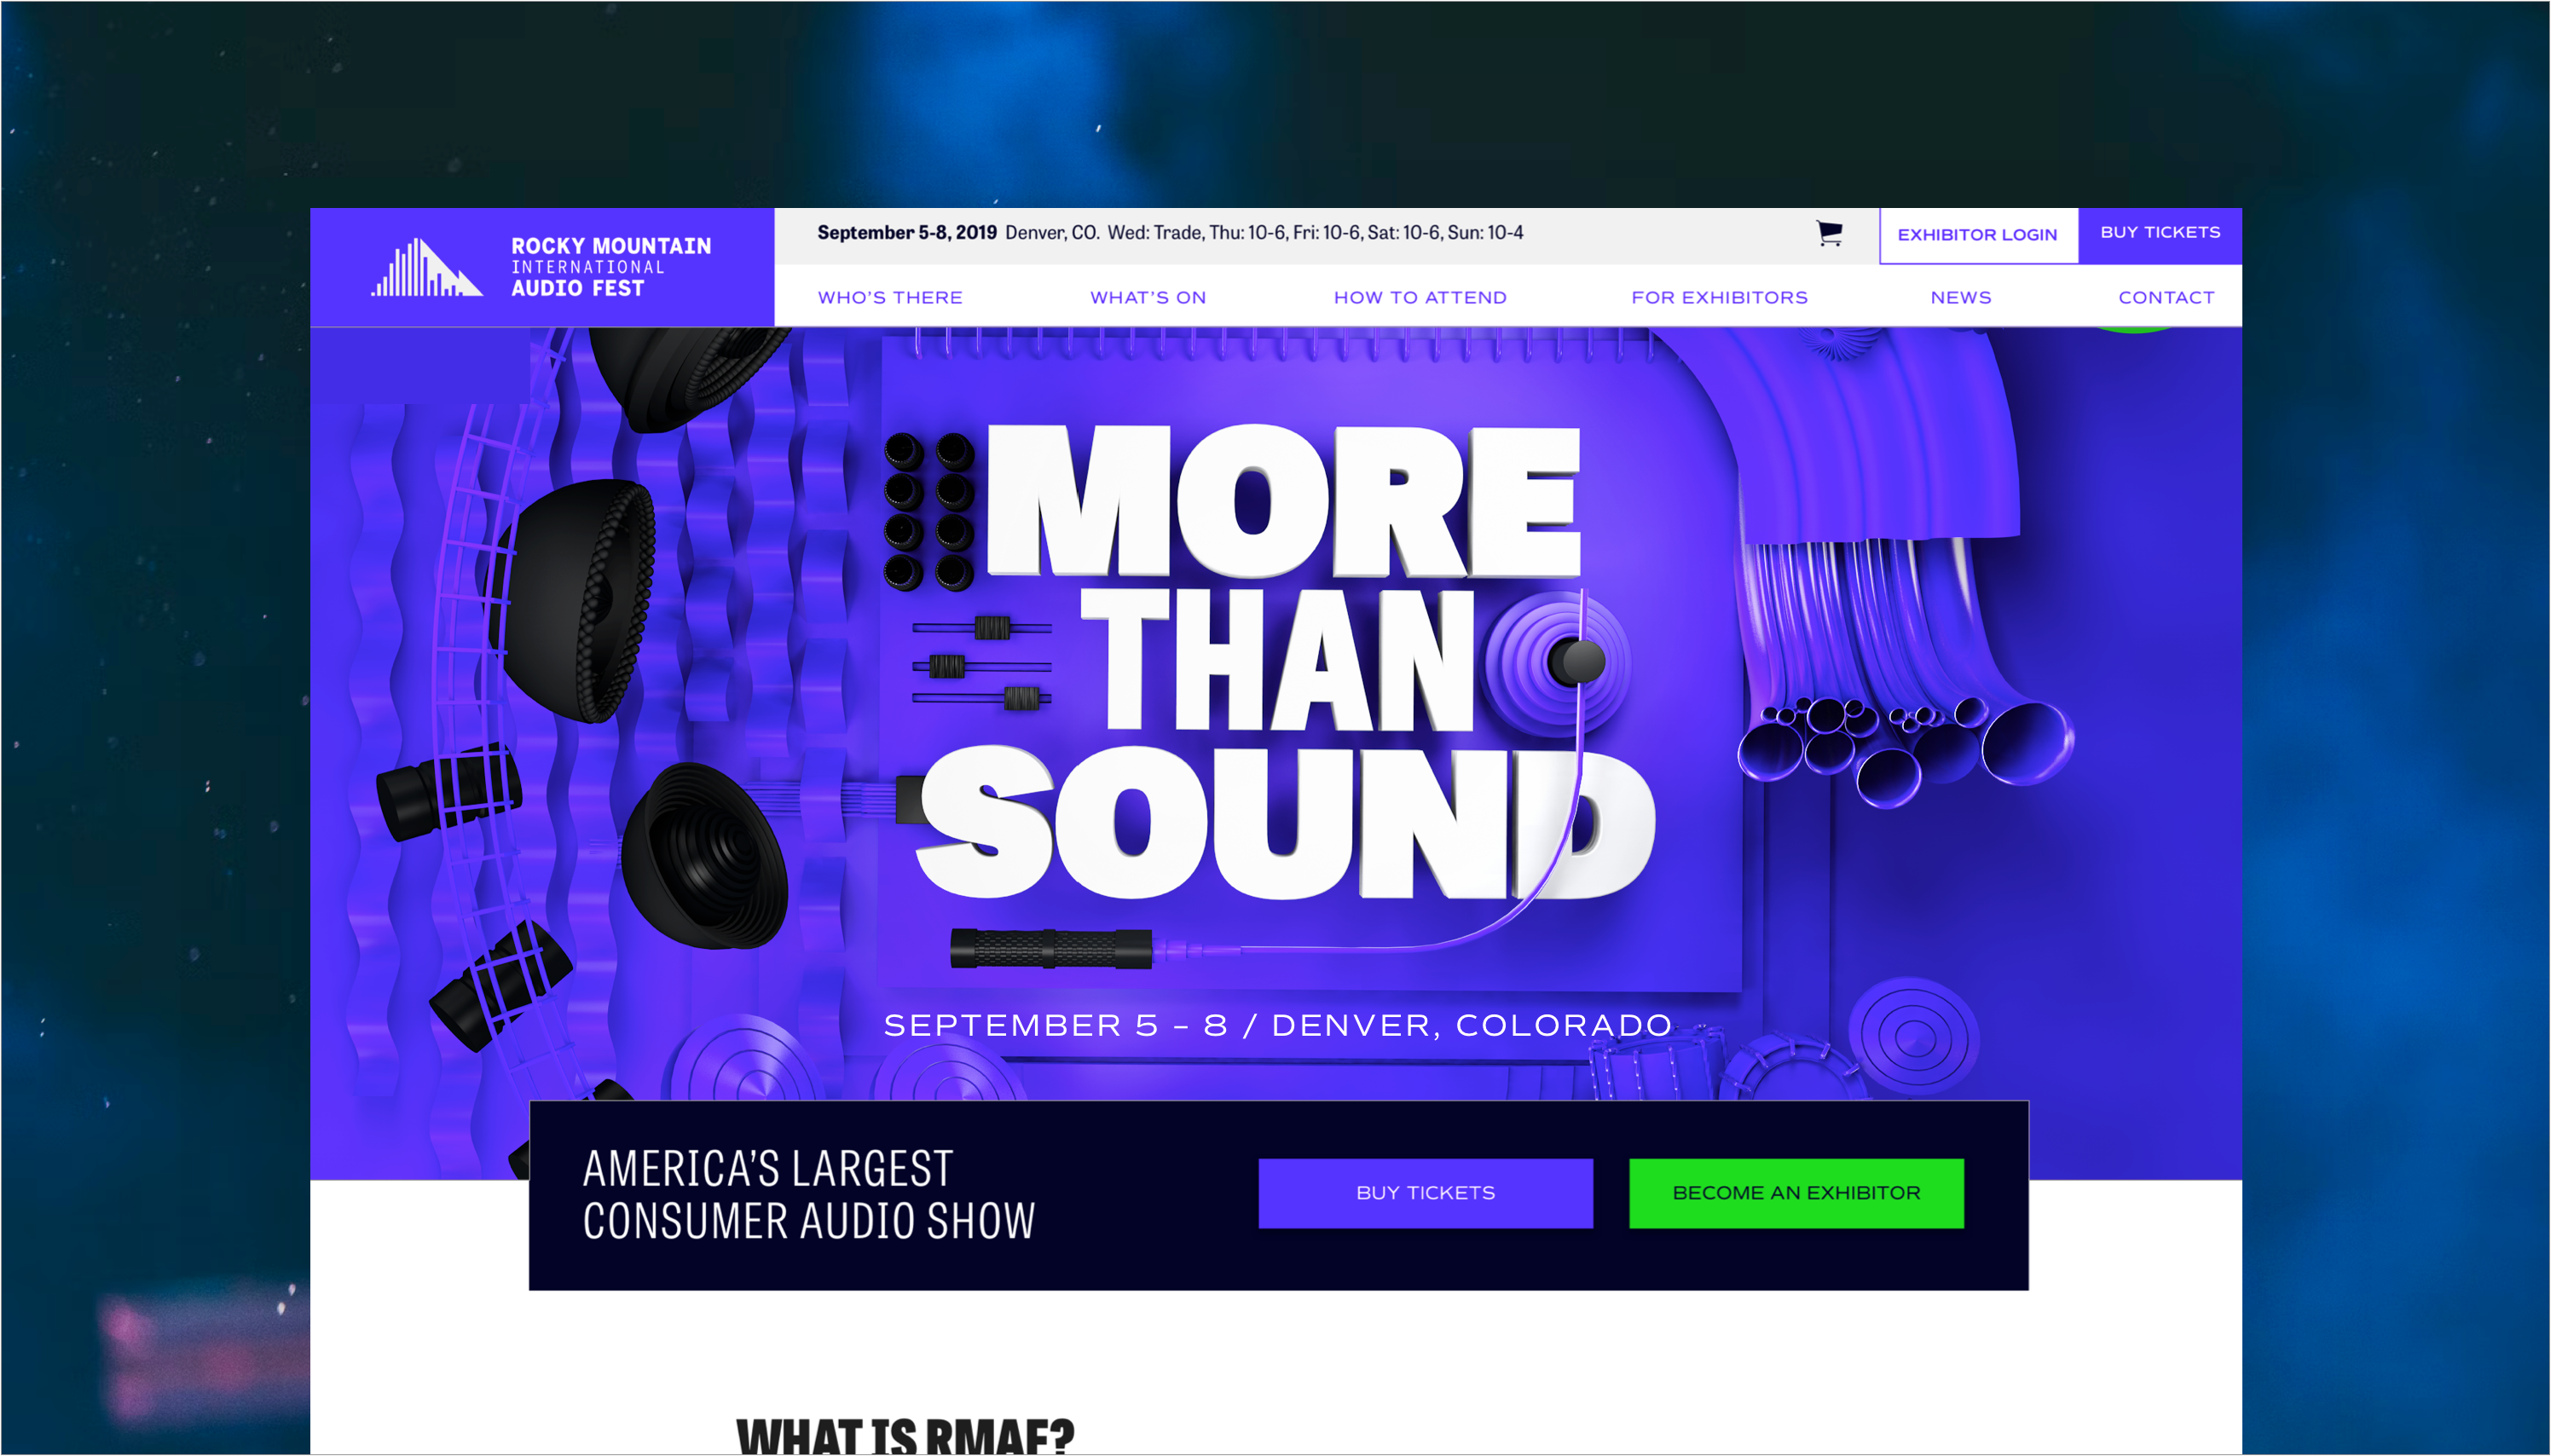 A website screenshot showcasing "More than Sound", the festival information and buttons to participate in "America's largest consumer audio show"